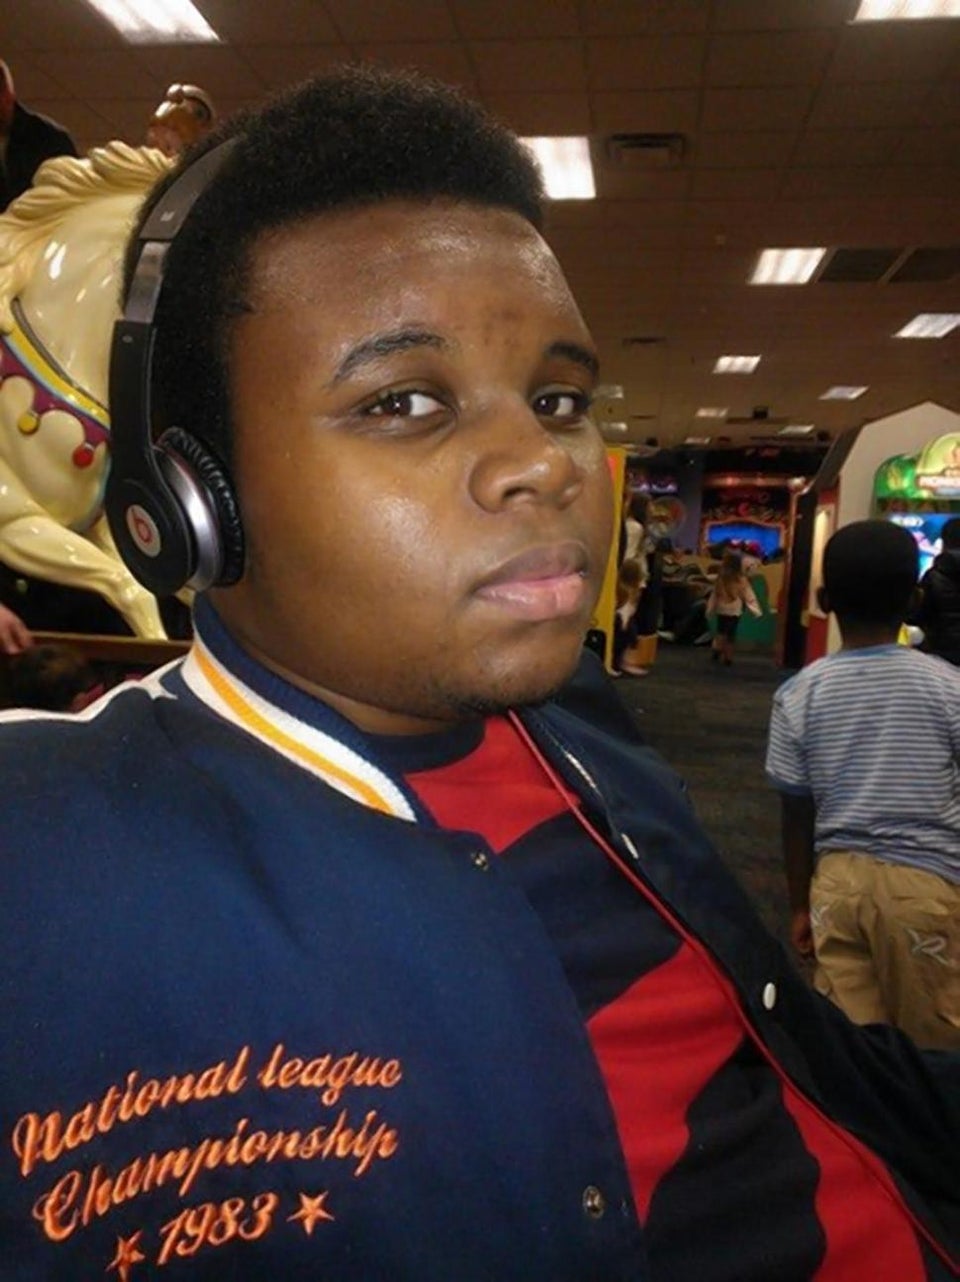 Mike Brown and Eric Garner: What’s Love Got To Do With It?